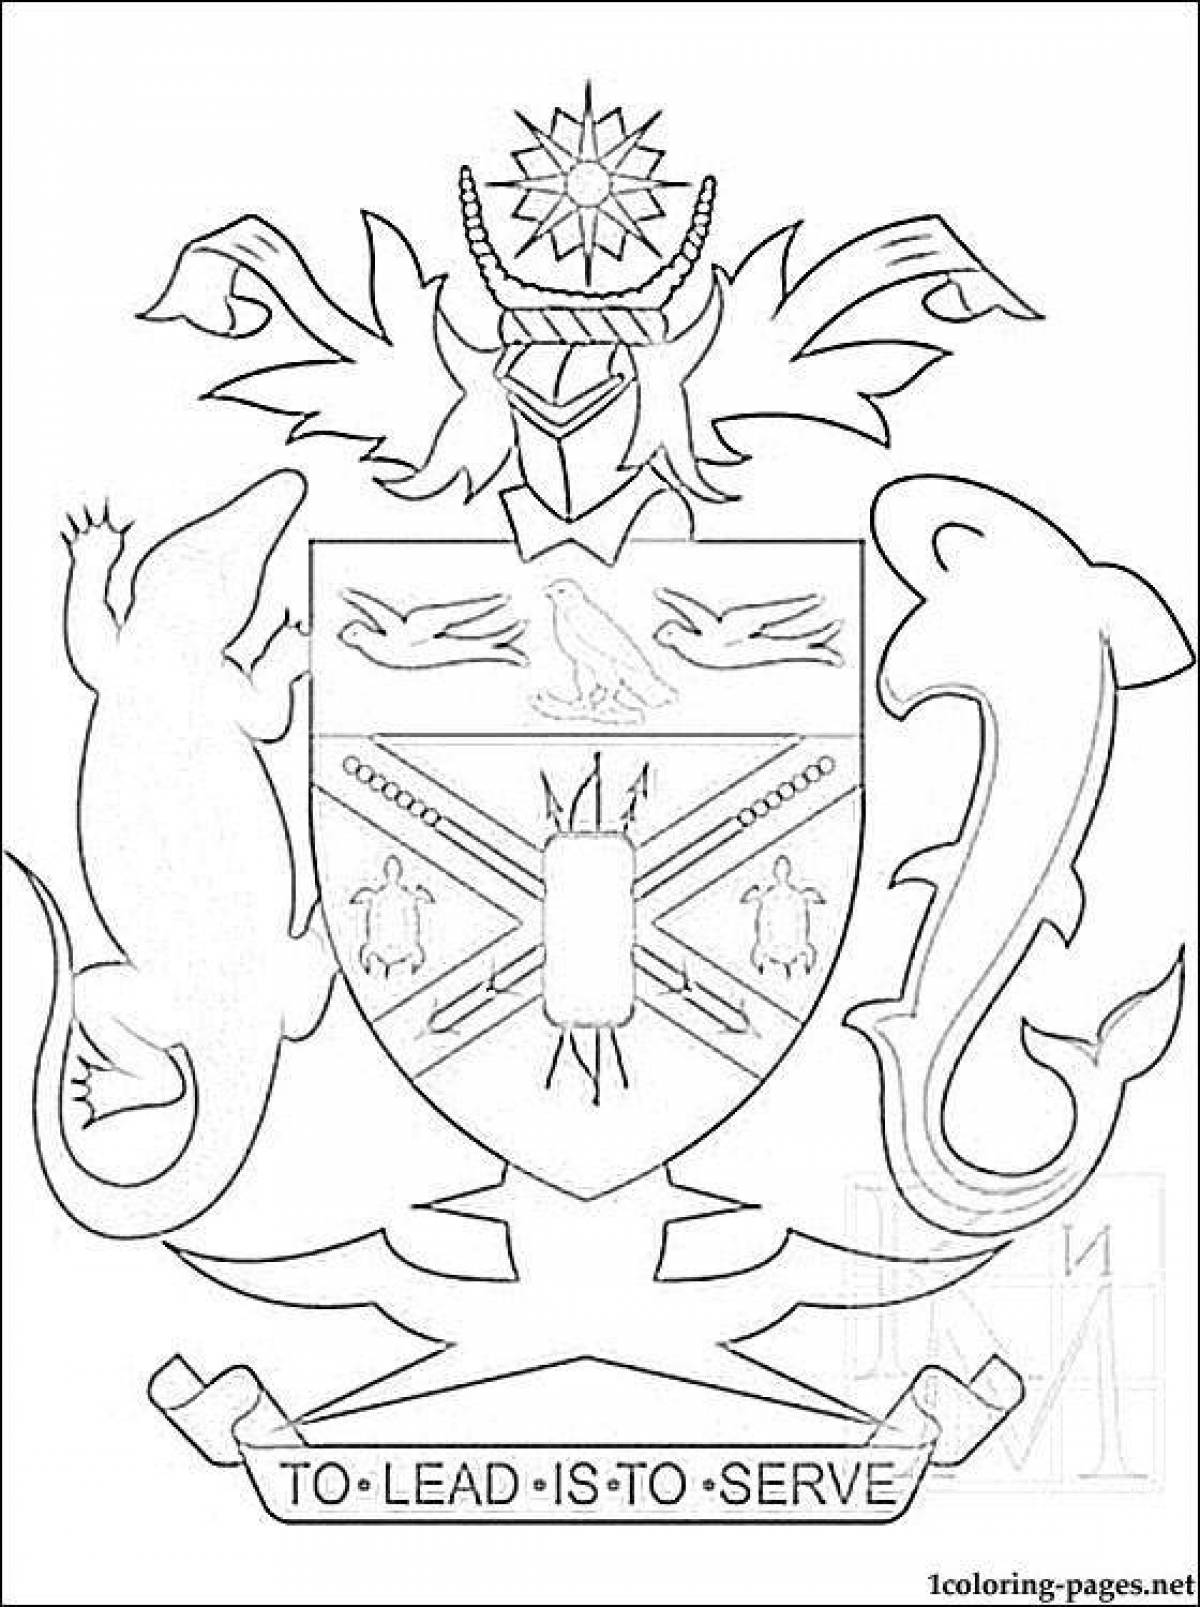 Impressive coloring family coat of arms